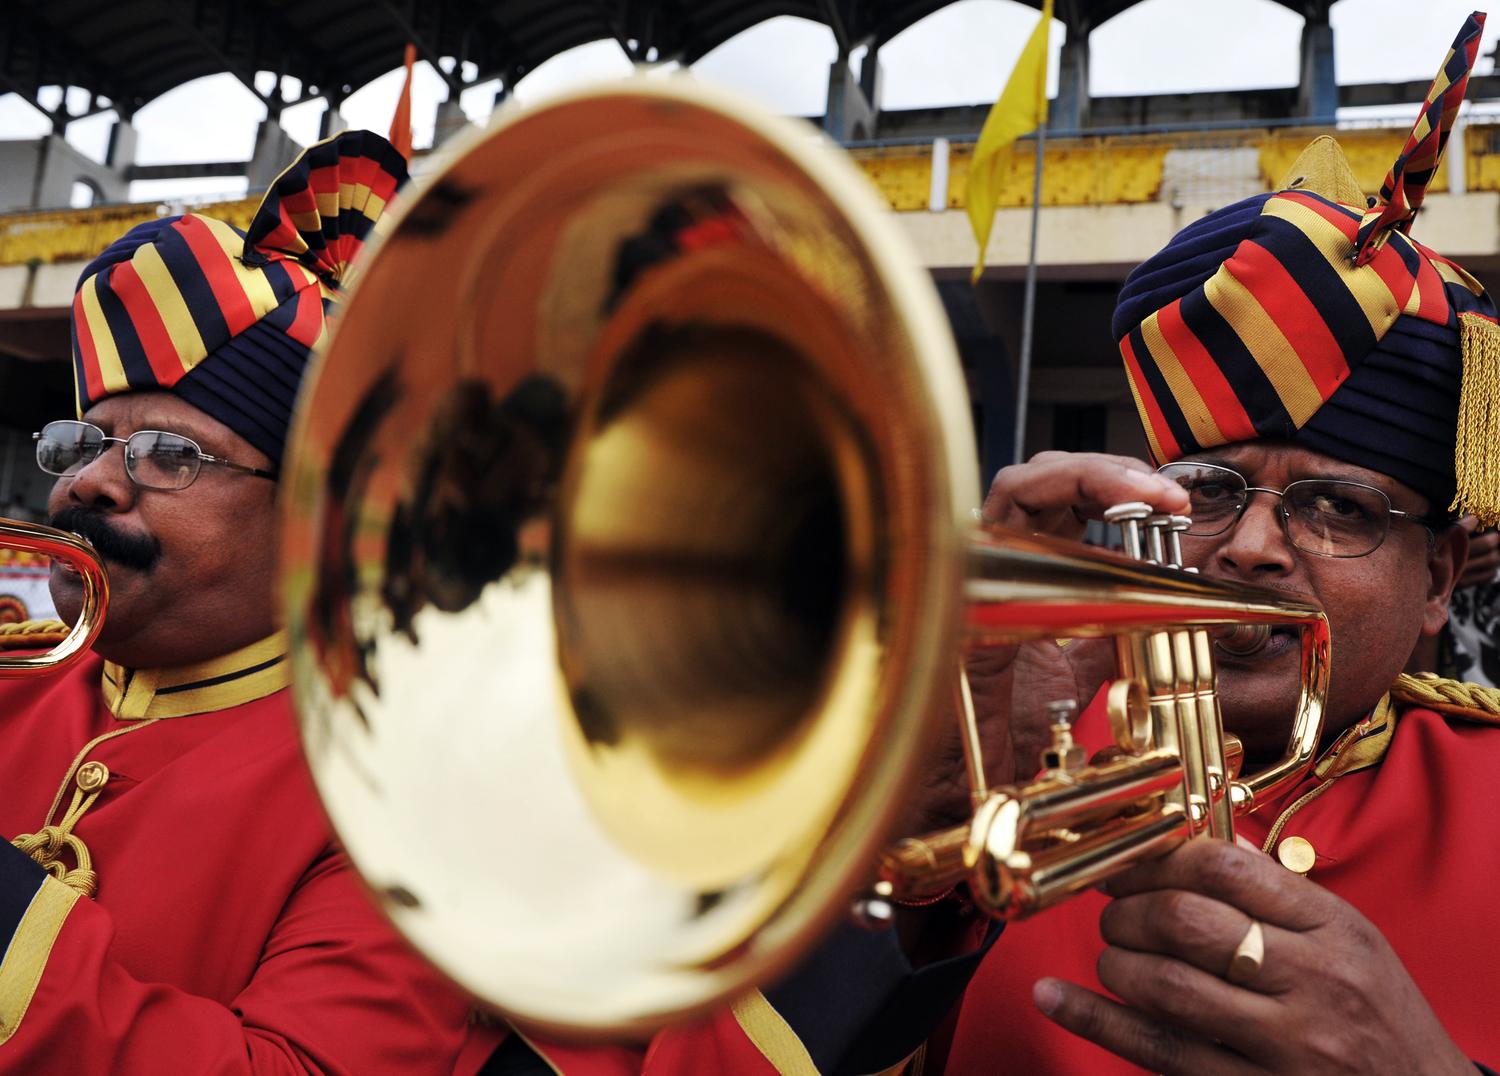 Pune's brass bands are waging a pitched battle, GQ India